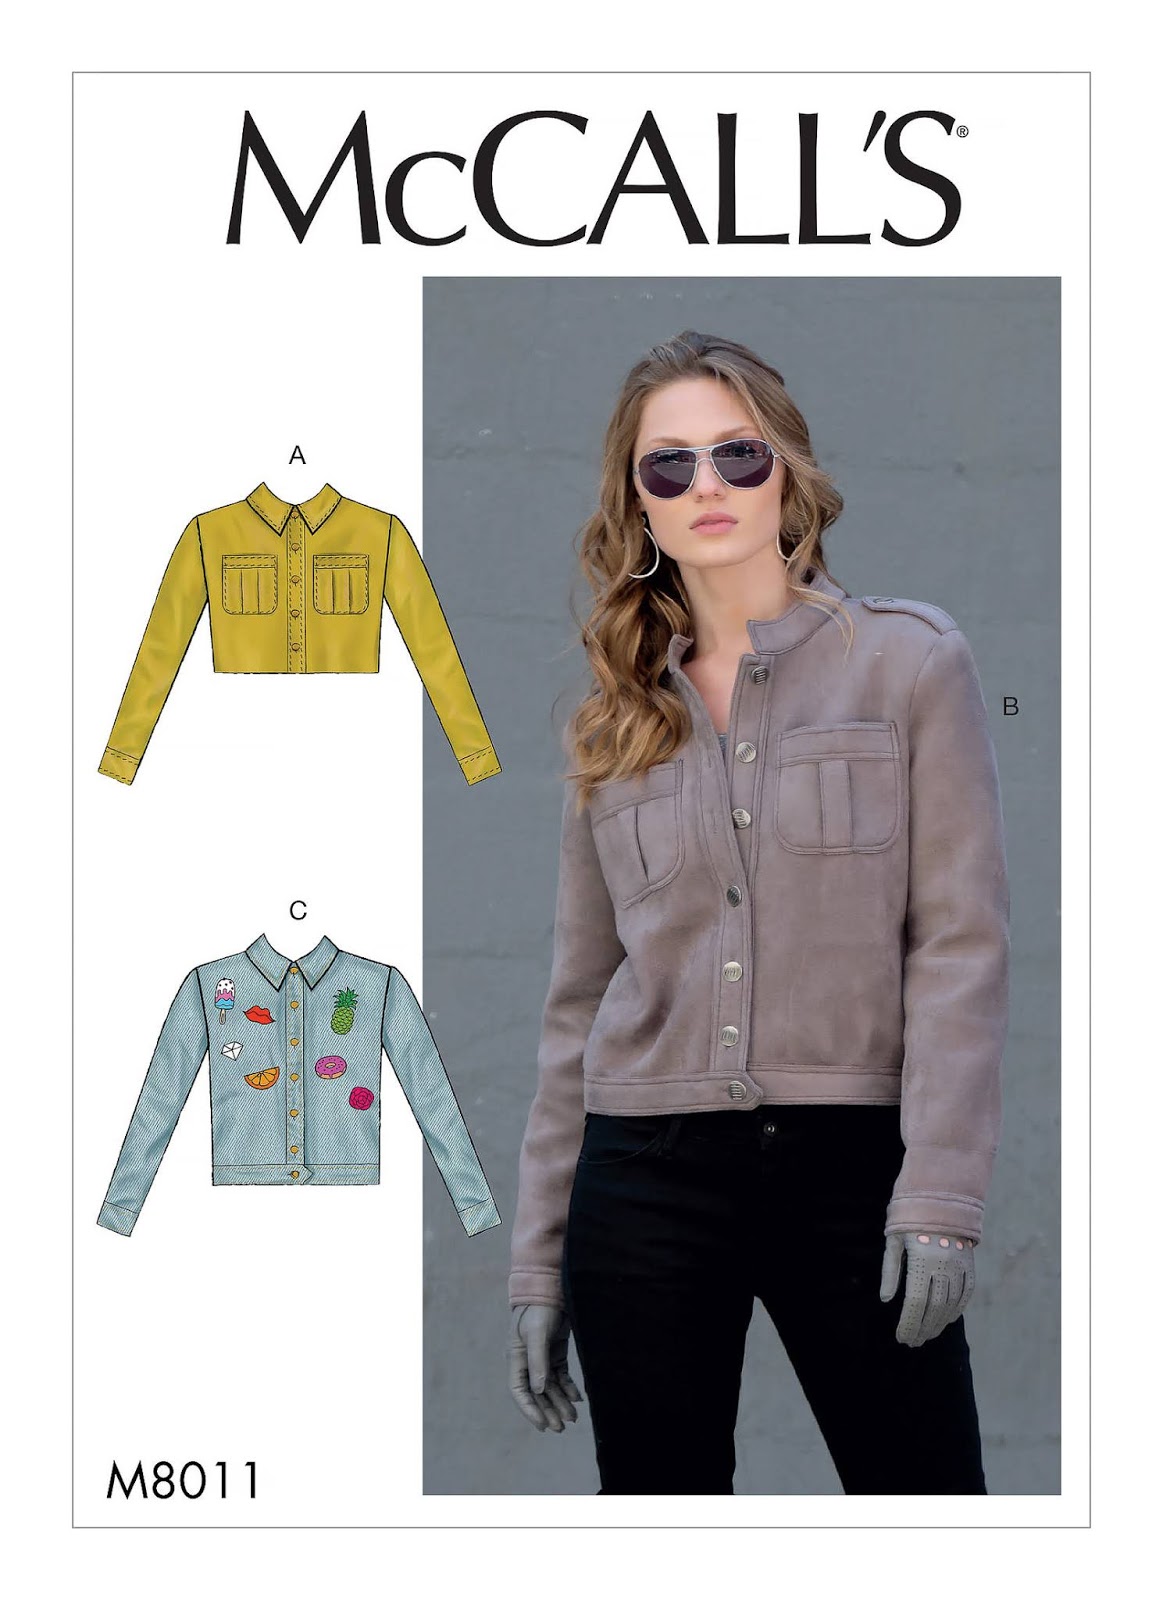 McCall Patterns - Fall 2019 | Erica Bunker | D.I.Y. Style! | Bloglovin’